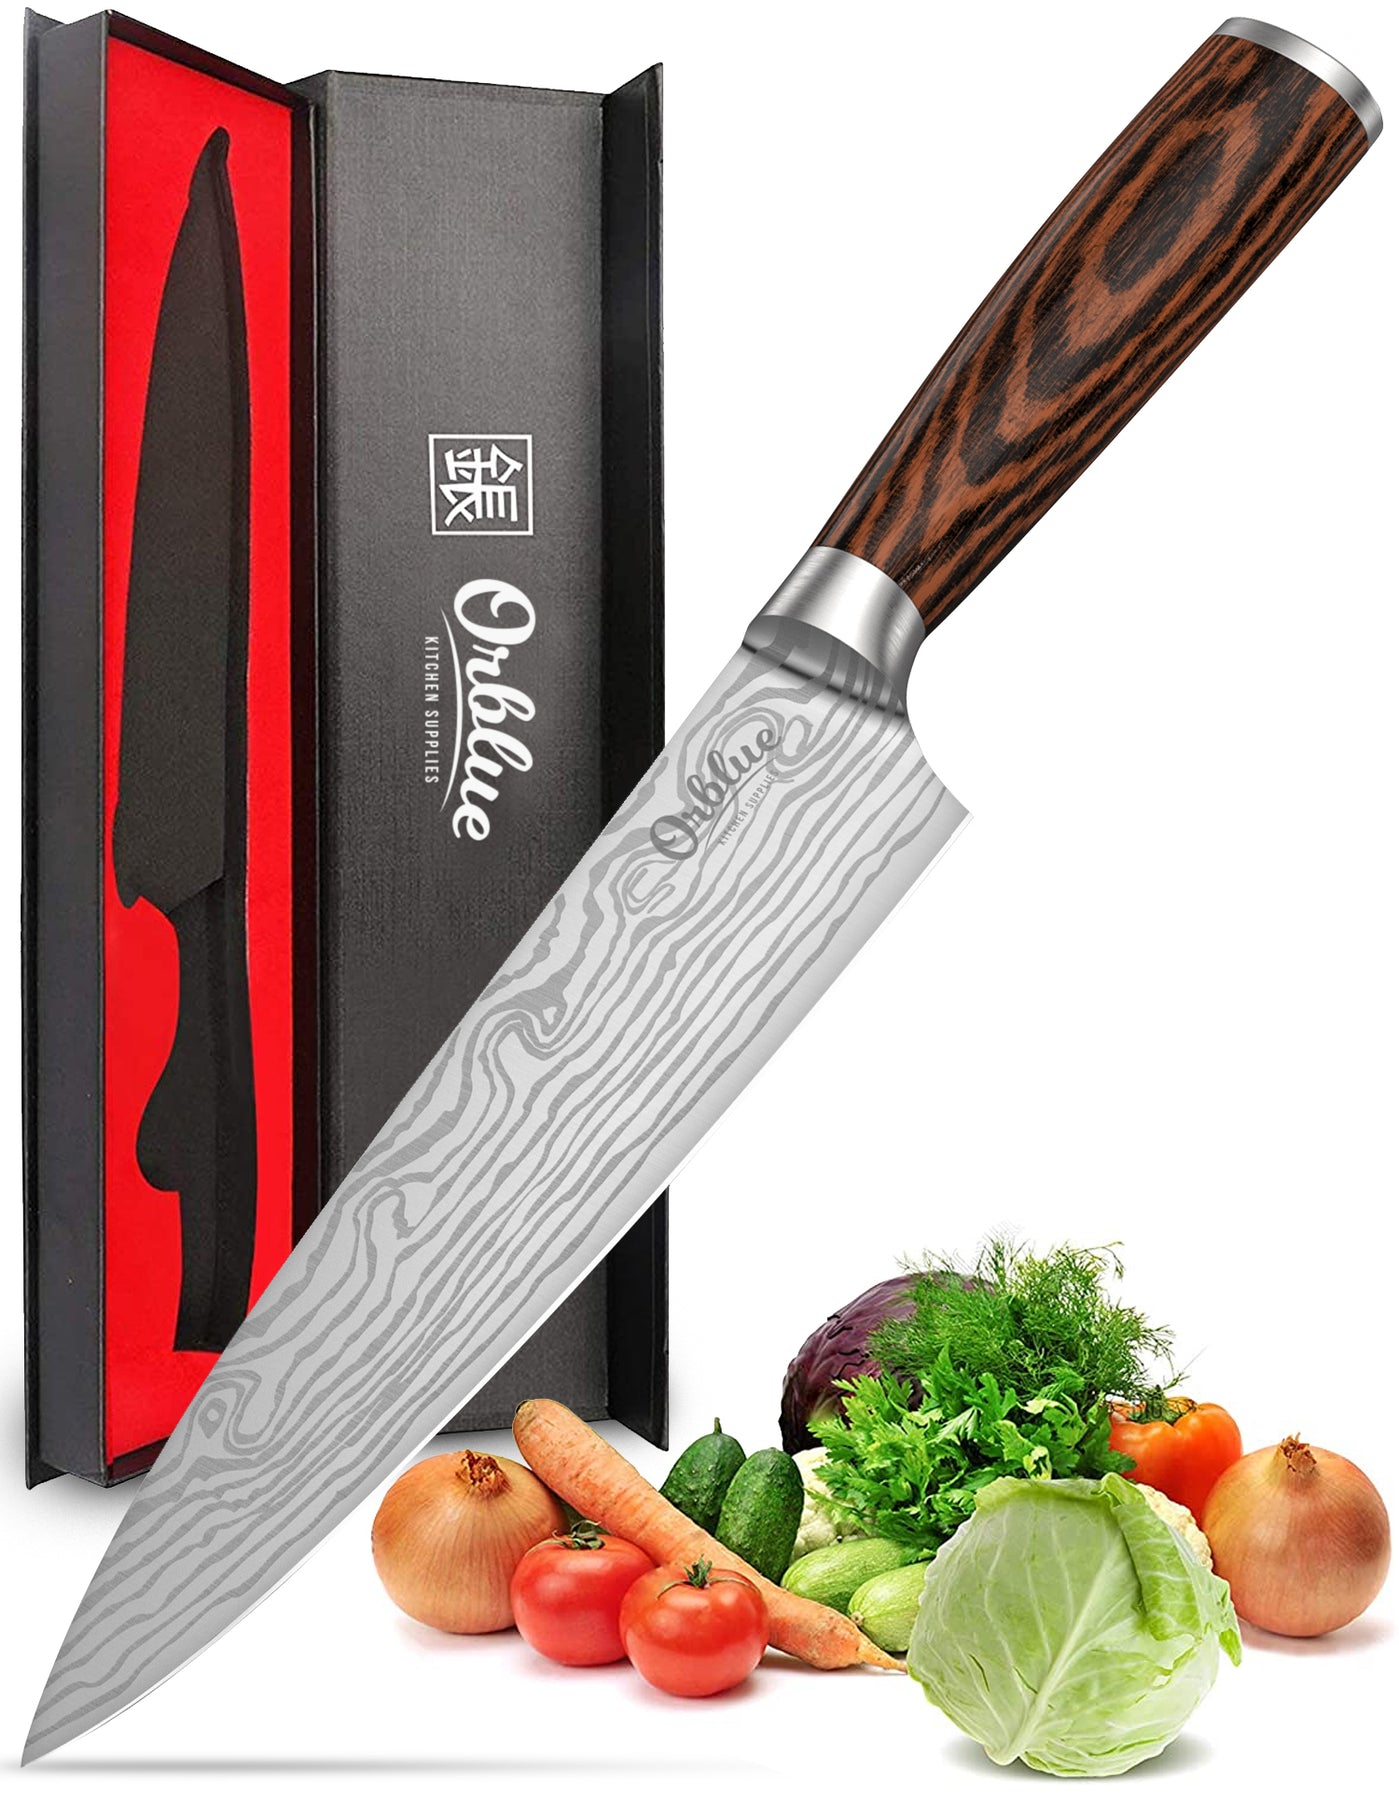 Dura Living Forged High Carbon Stainless Steel Kitchen 8 inch Chef Knife, Royal Blue